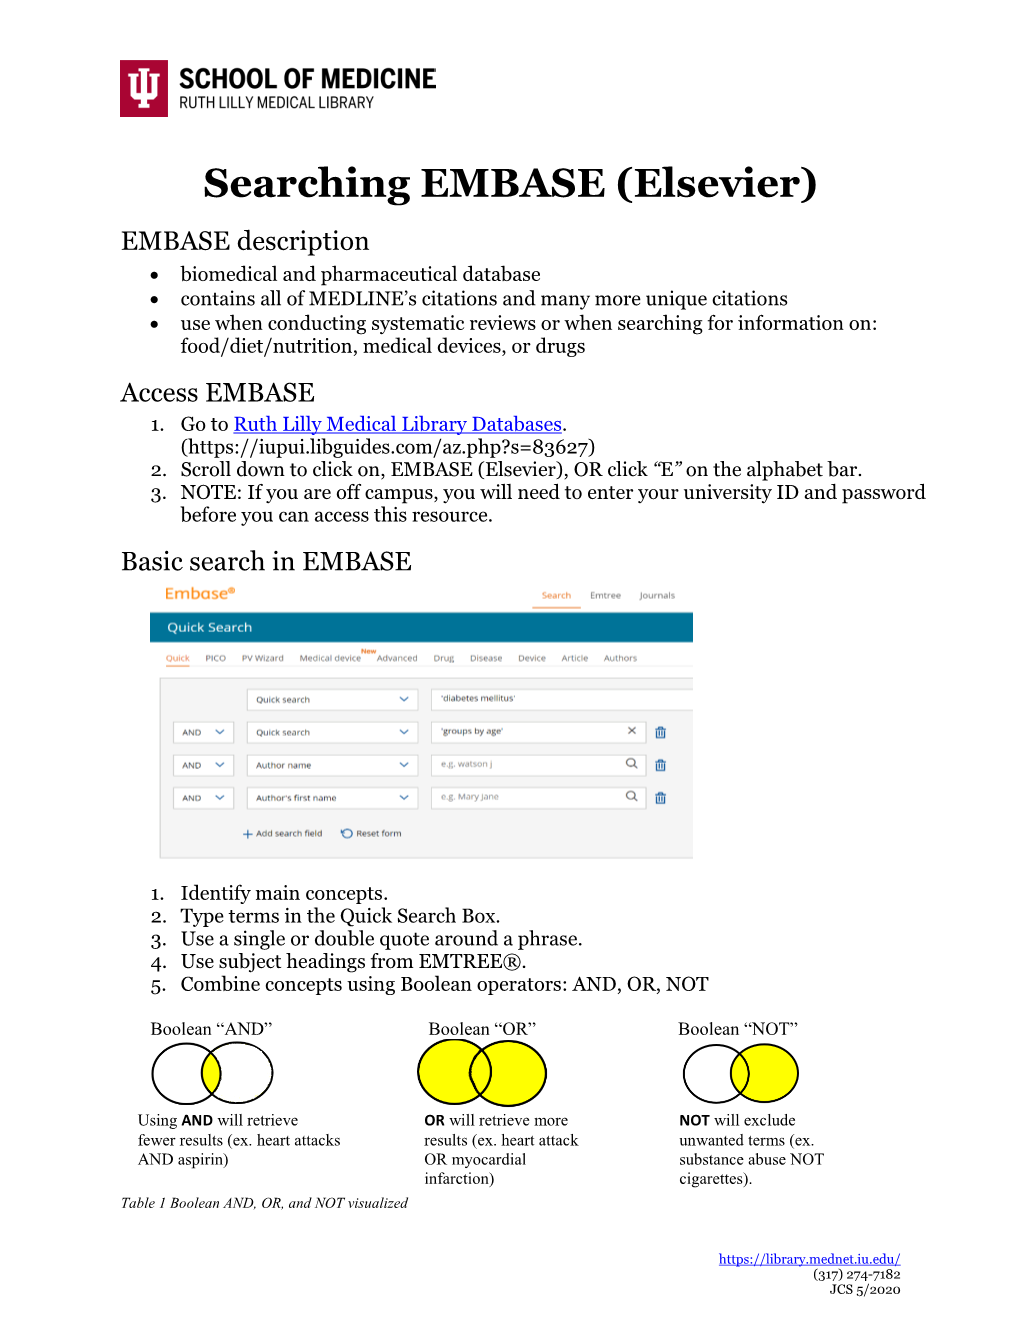 Searching EMBASE (Elsevier)